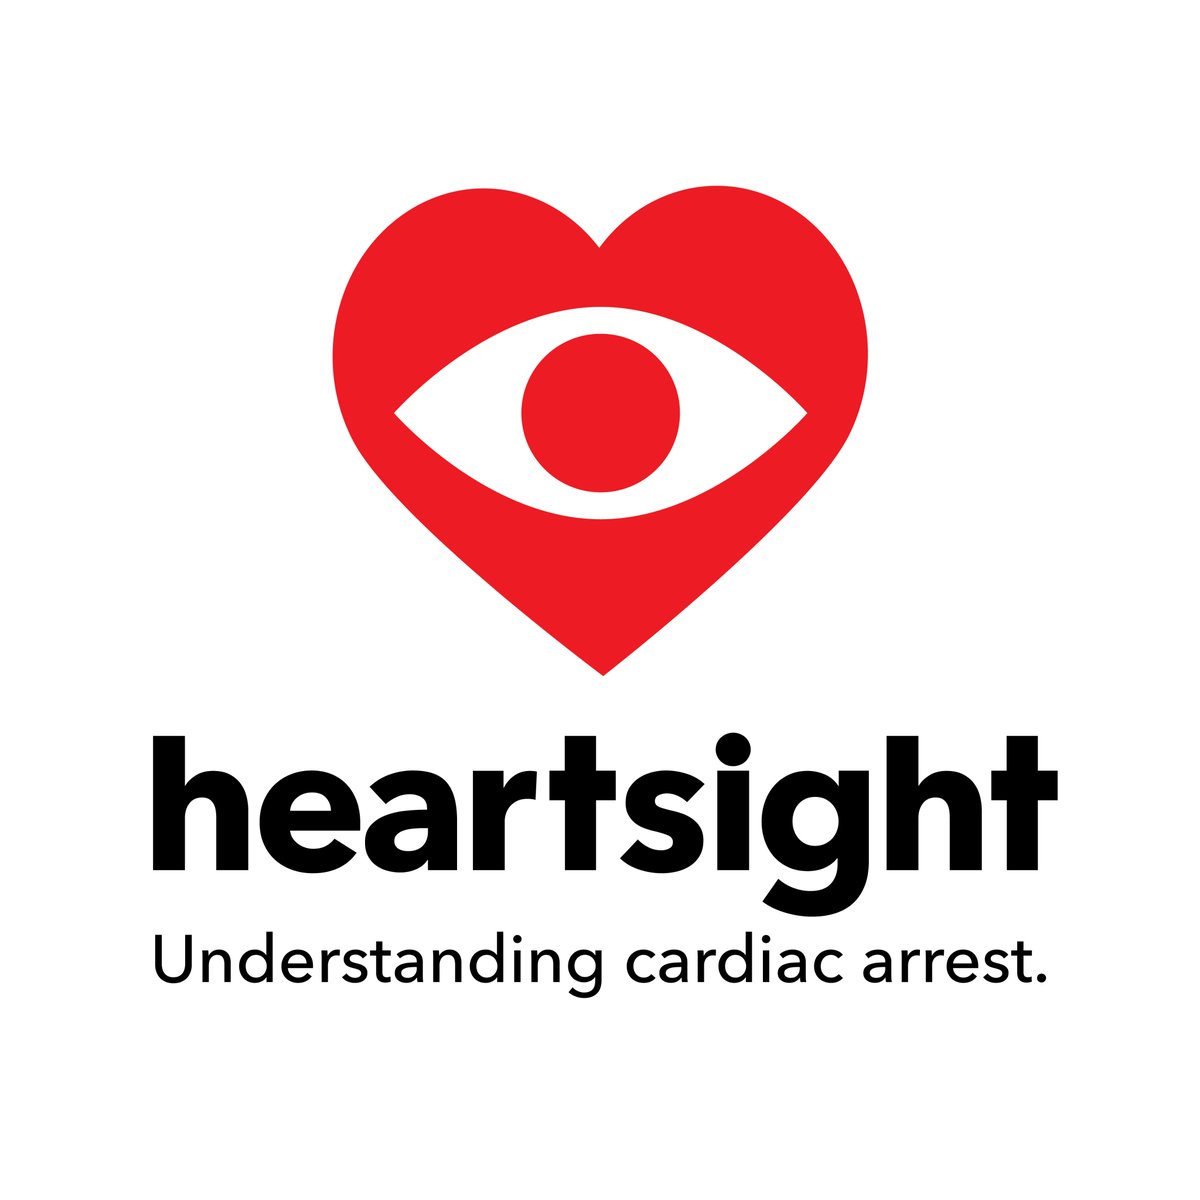 Announcing, Heartsight, a trusted, informational resource co-created by a North American team of experts and volunteers with diverse backgrounds and skills, all linked by lived experiences with cardiac arrest. We are you. We see you. ourheartsight.com #heartsight